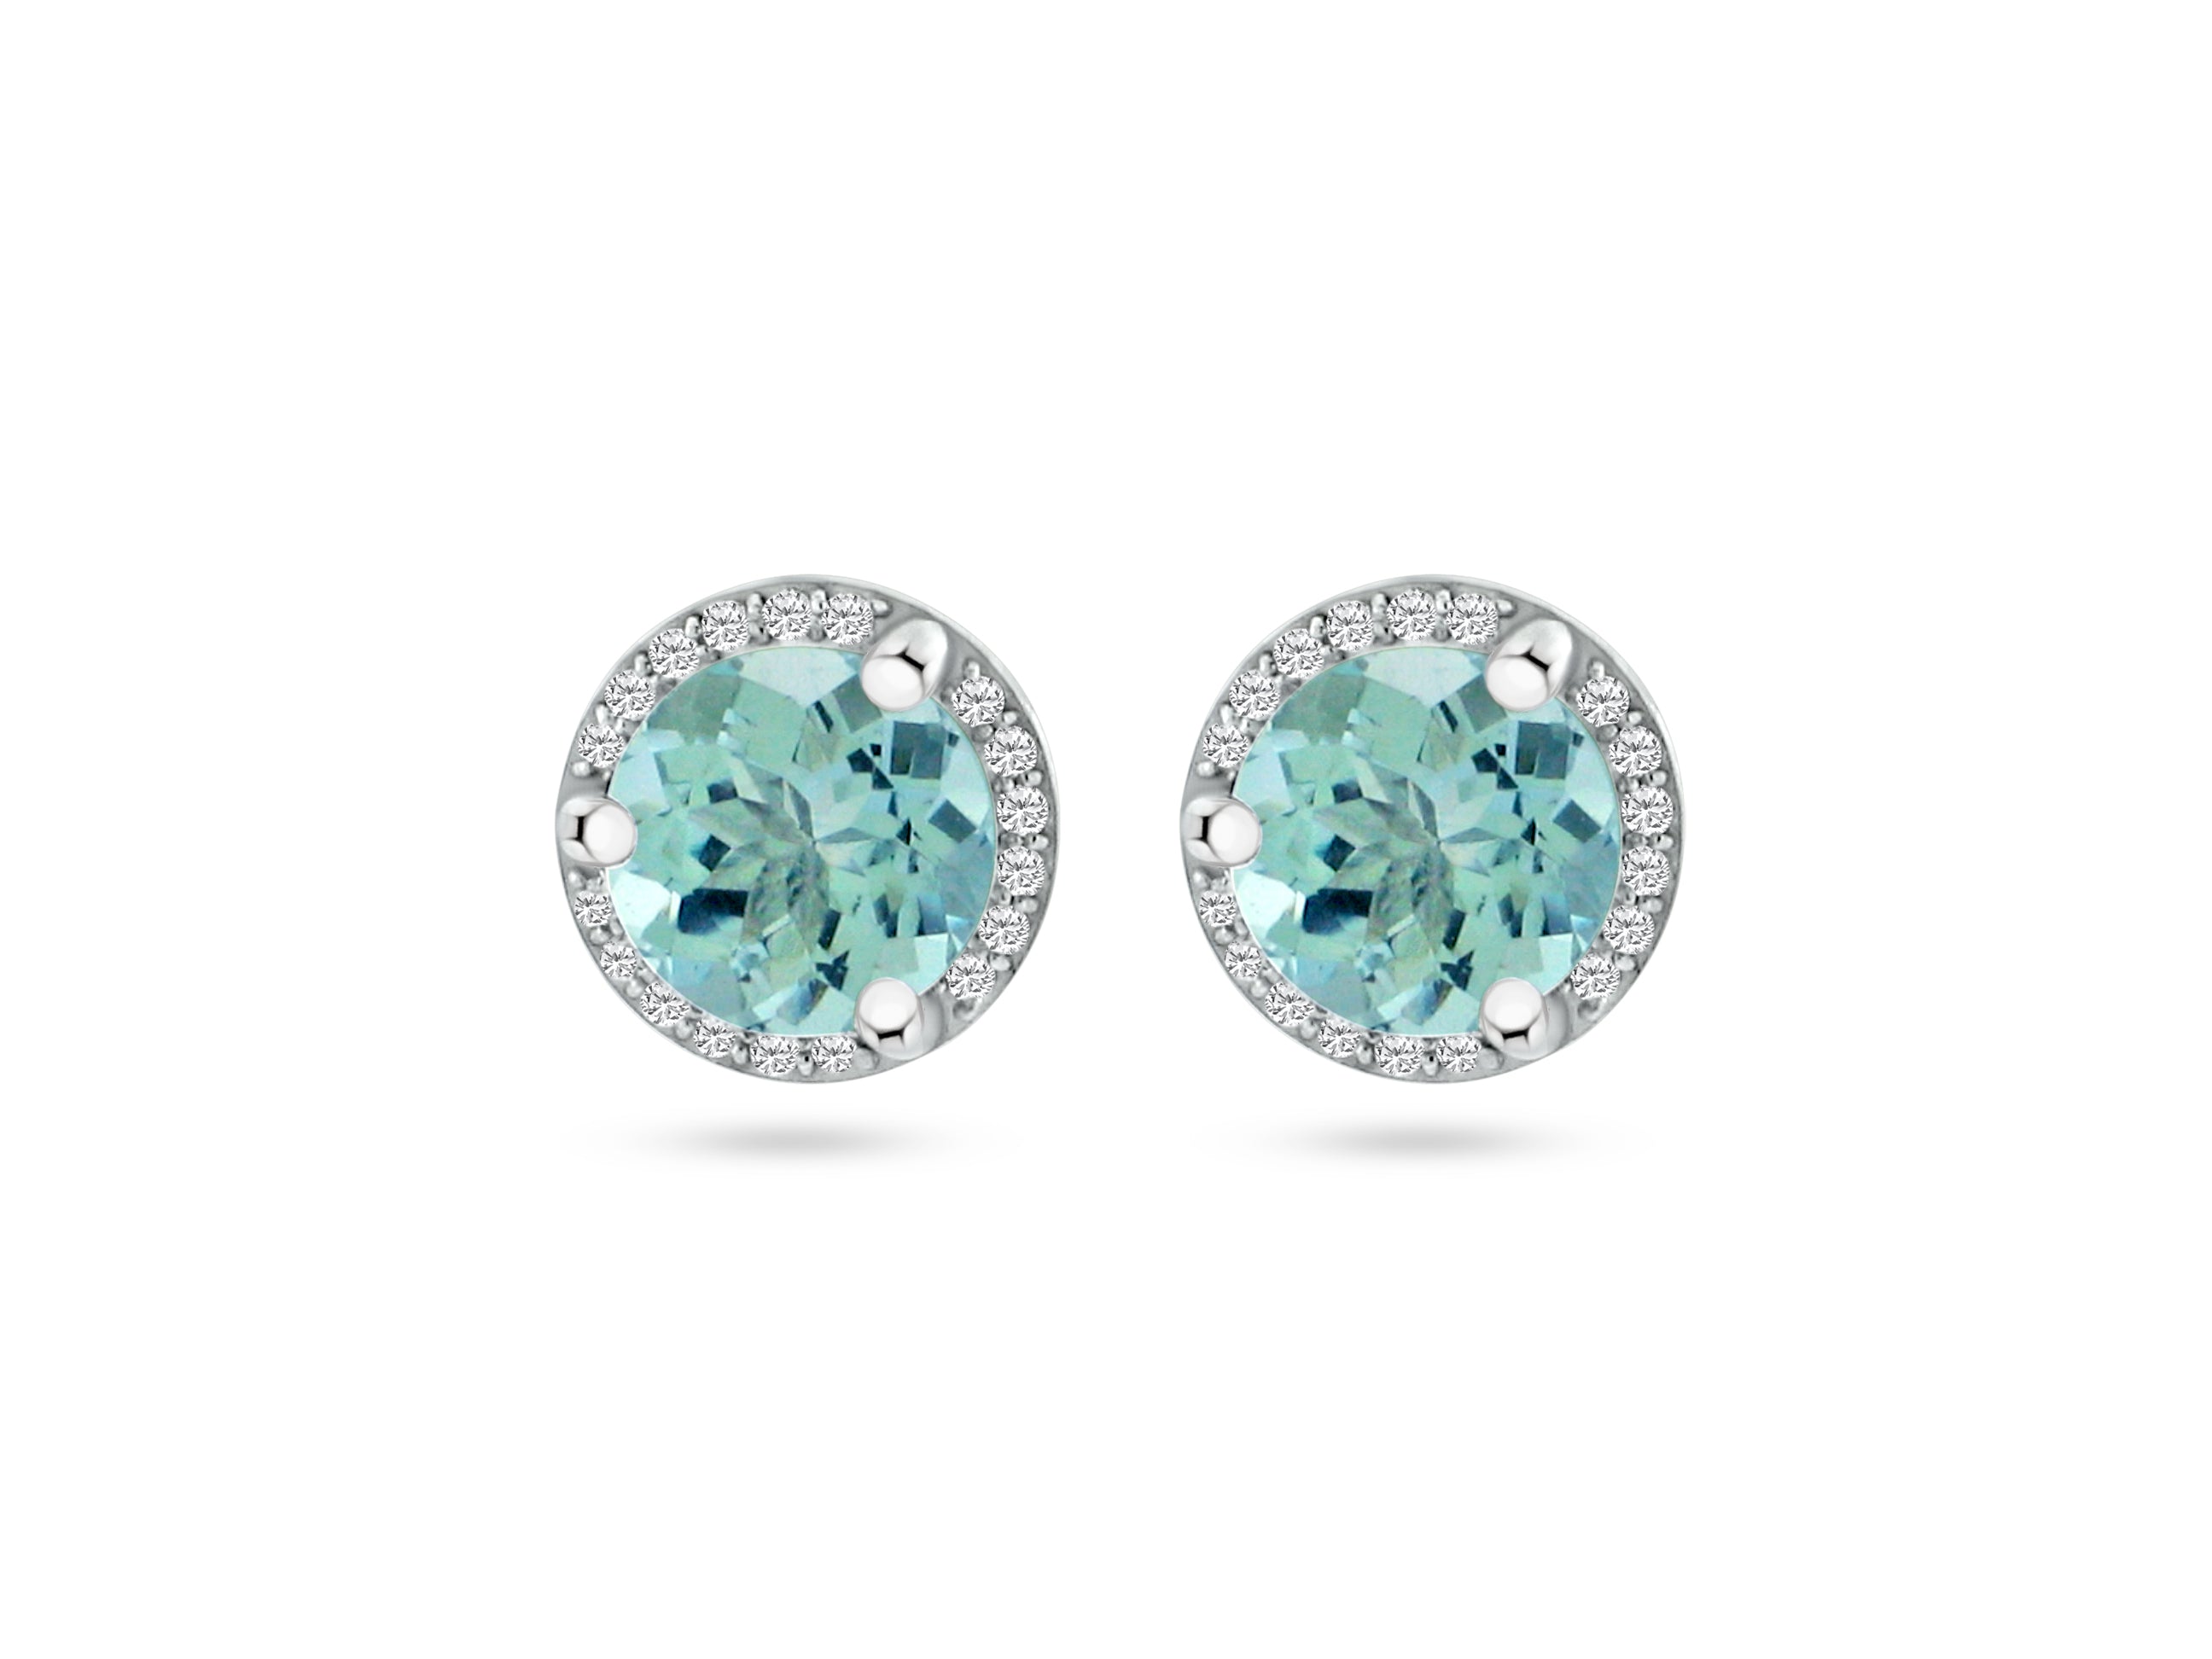 MULLOYS PRIVE 18K WHITE GOLD 2.18CT TOTAL  AQUAMARINE AND .11CT SI1 CLARITY G COLOR  DIAMOND STUD EARRINGS